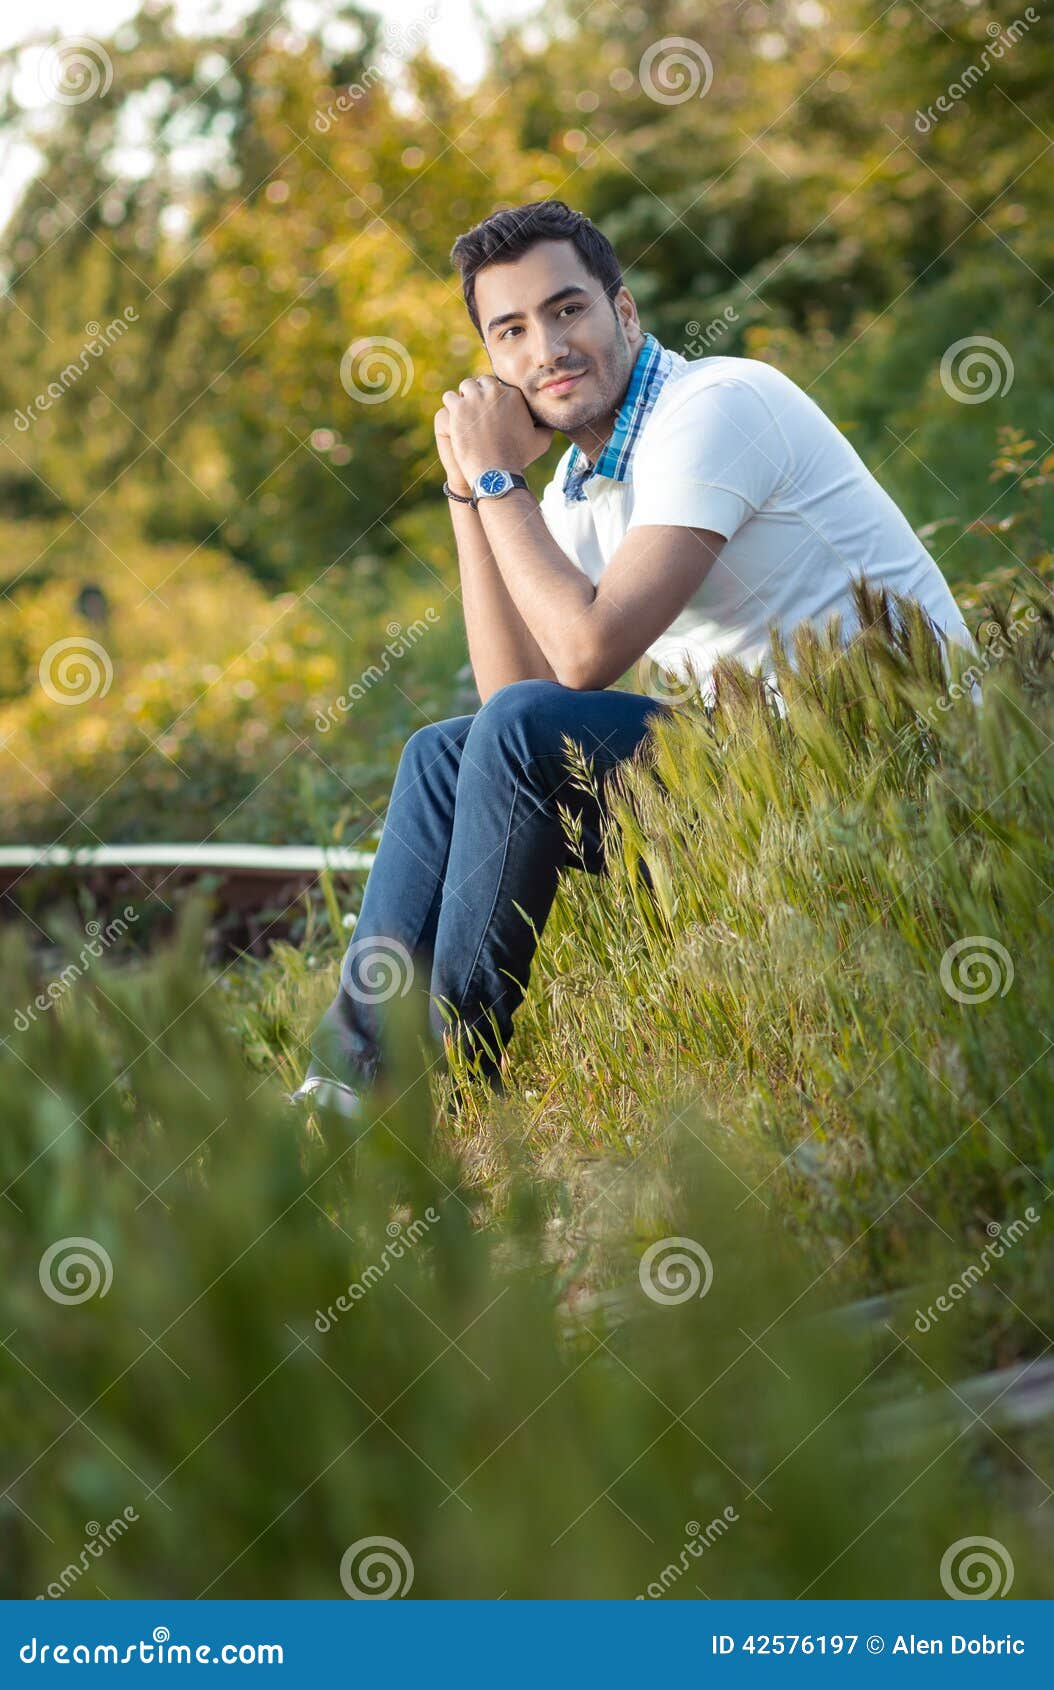 Man Sitting on Grass in Forest Stock Image - Image of relax, daylight ...